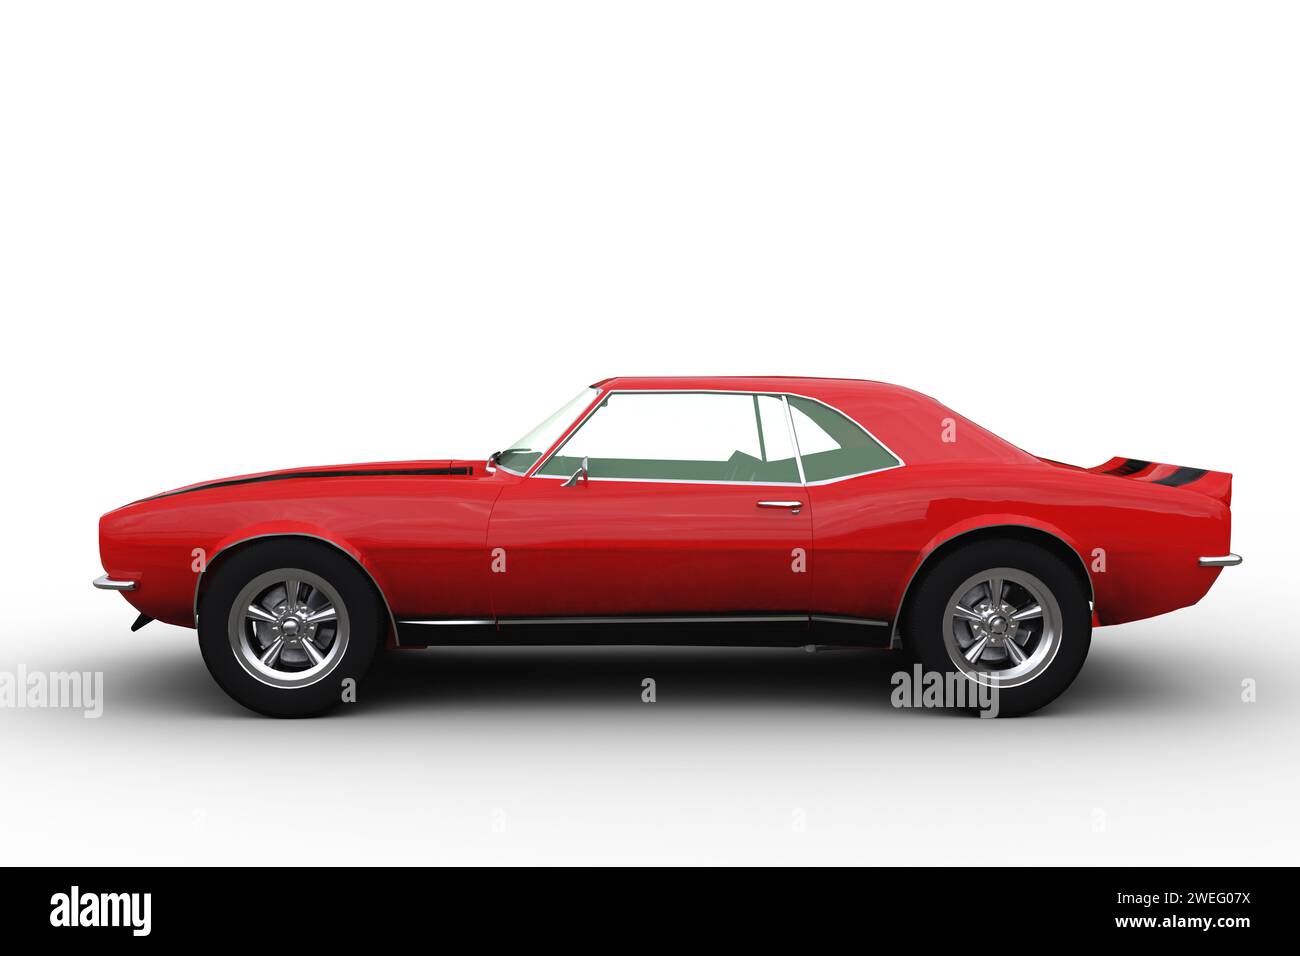 Red retro American muscle car seen from side view. 3d illustration isolated on a white background. Stock Photo